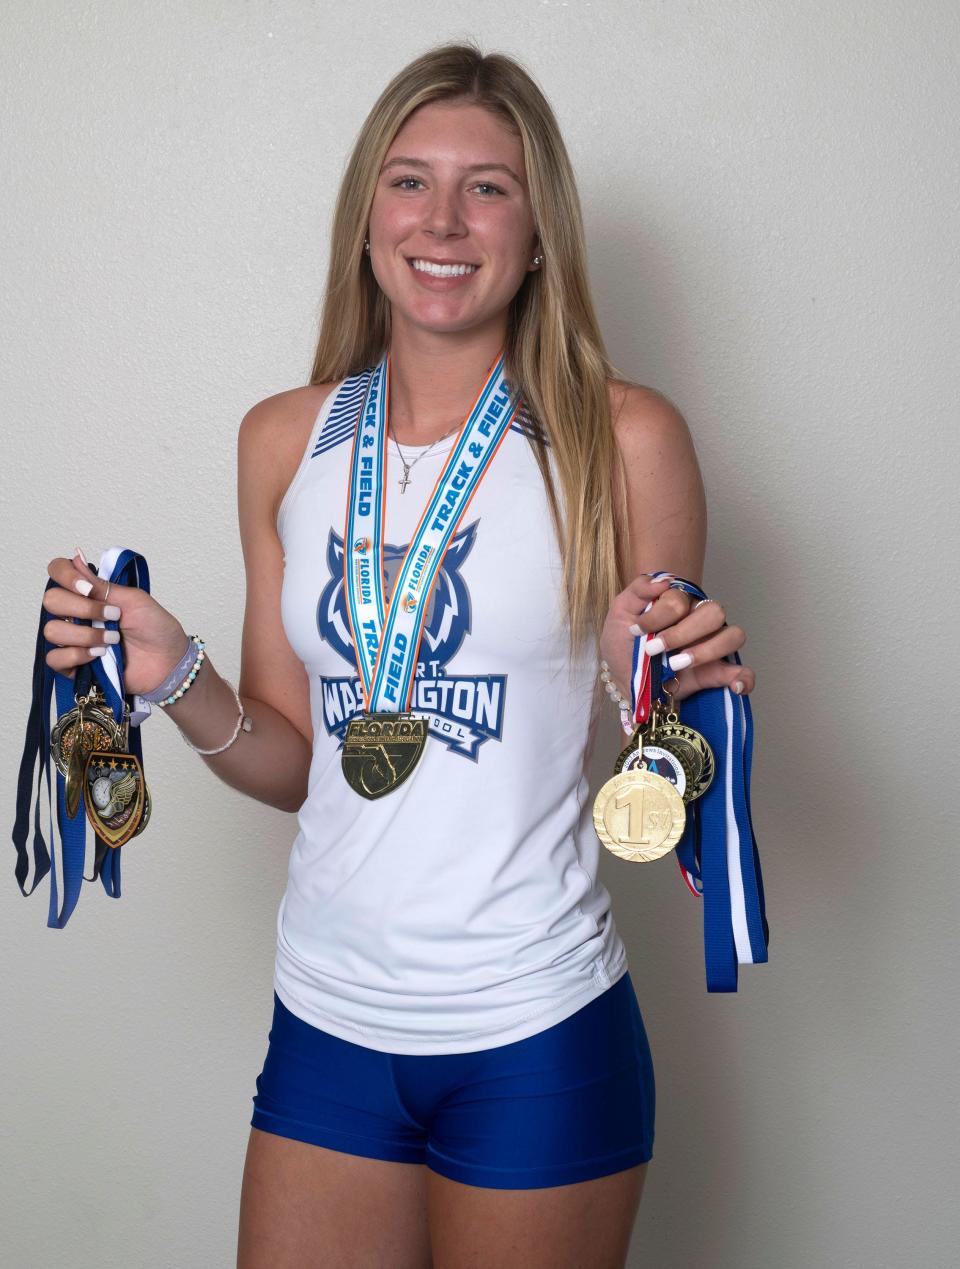 Girls Co-Track and Field Athlete of the Year - Kayden Engel